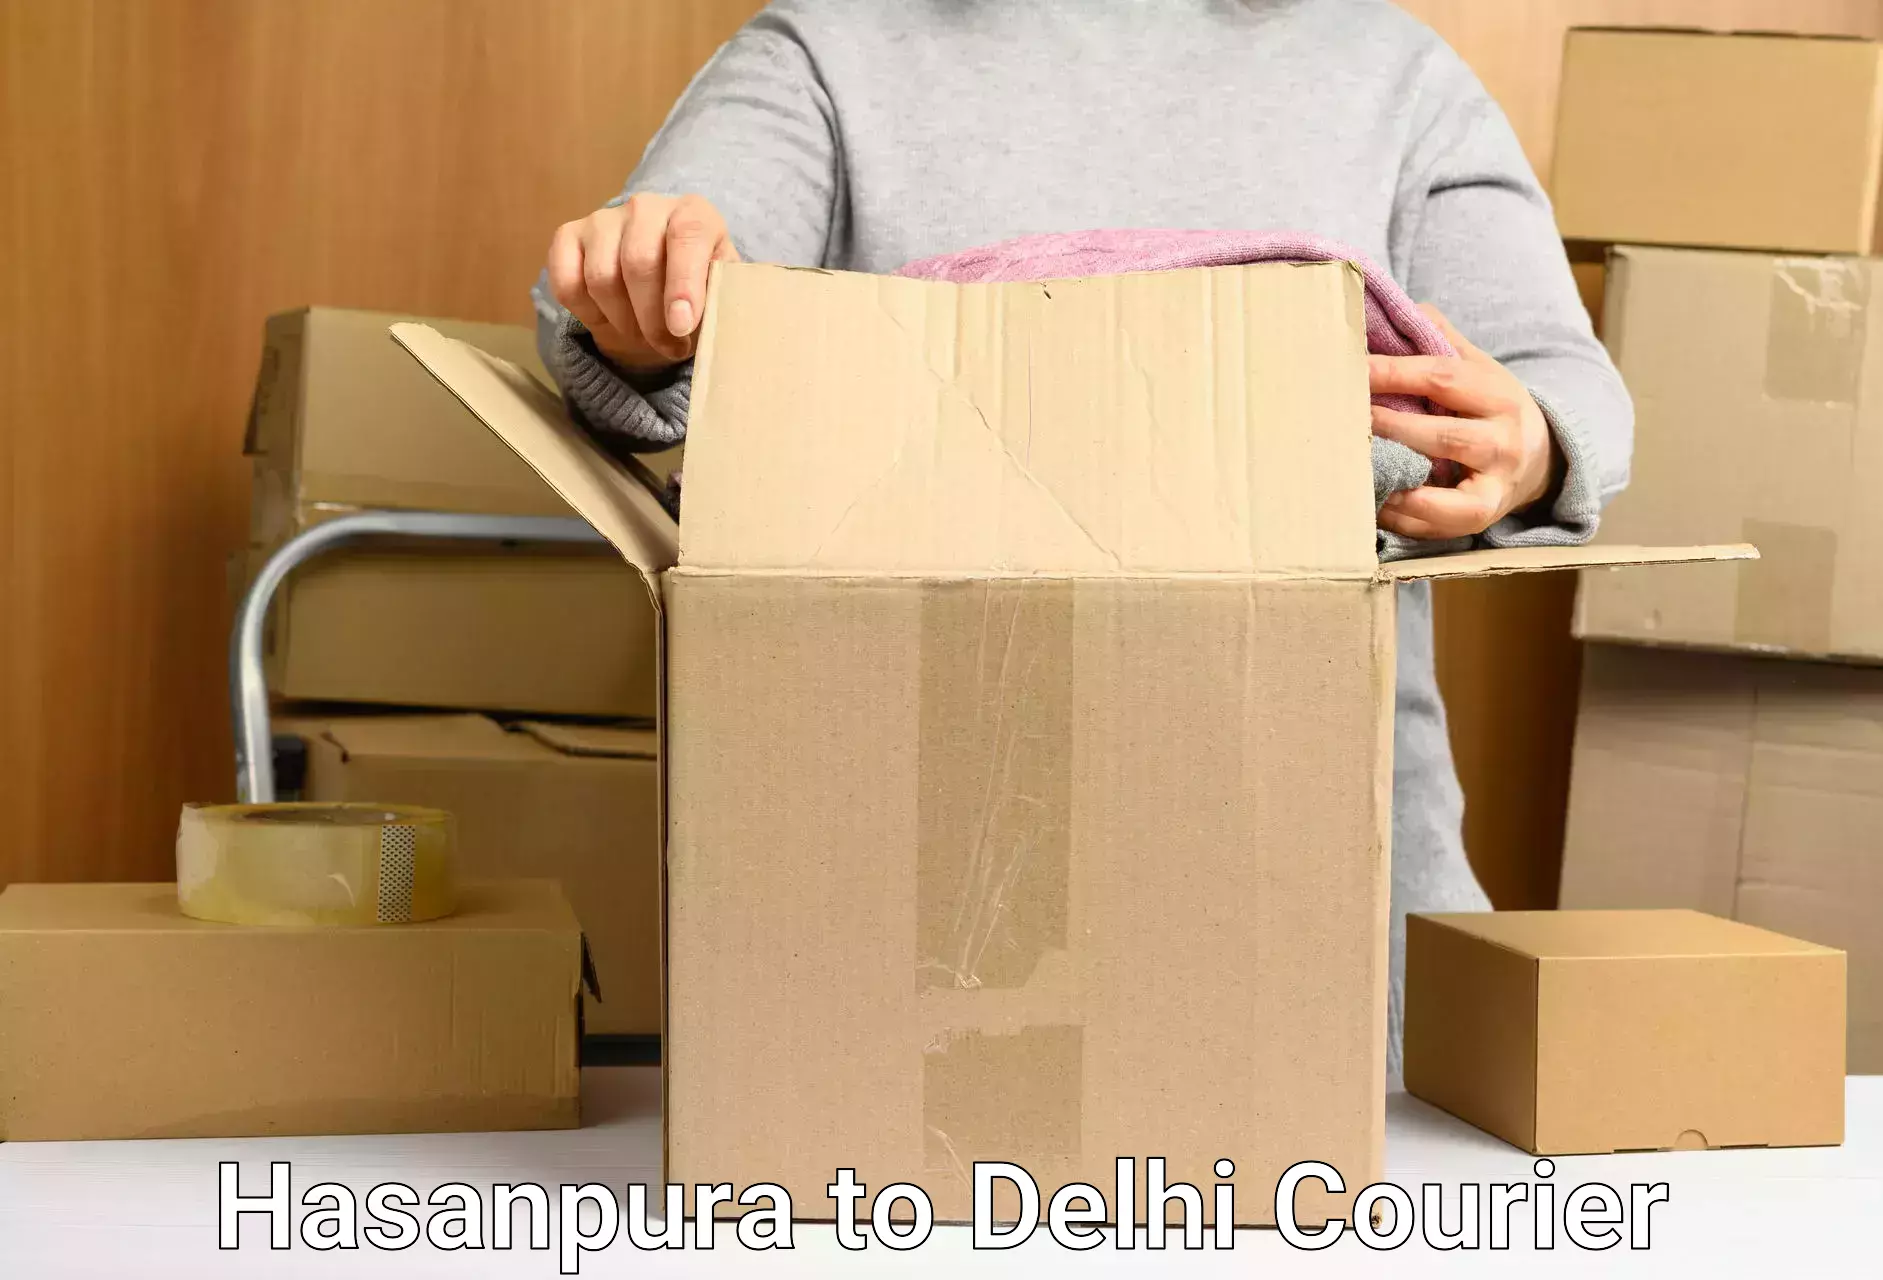 Business delivery service Hasanpura to University of Delhi